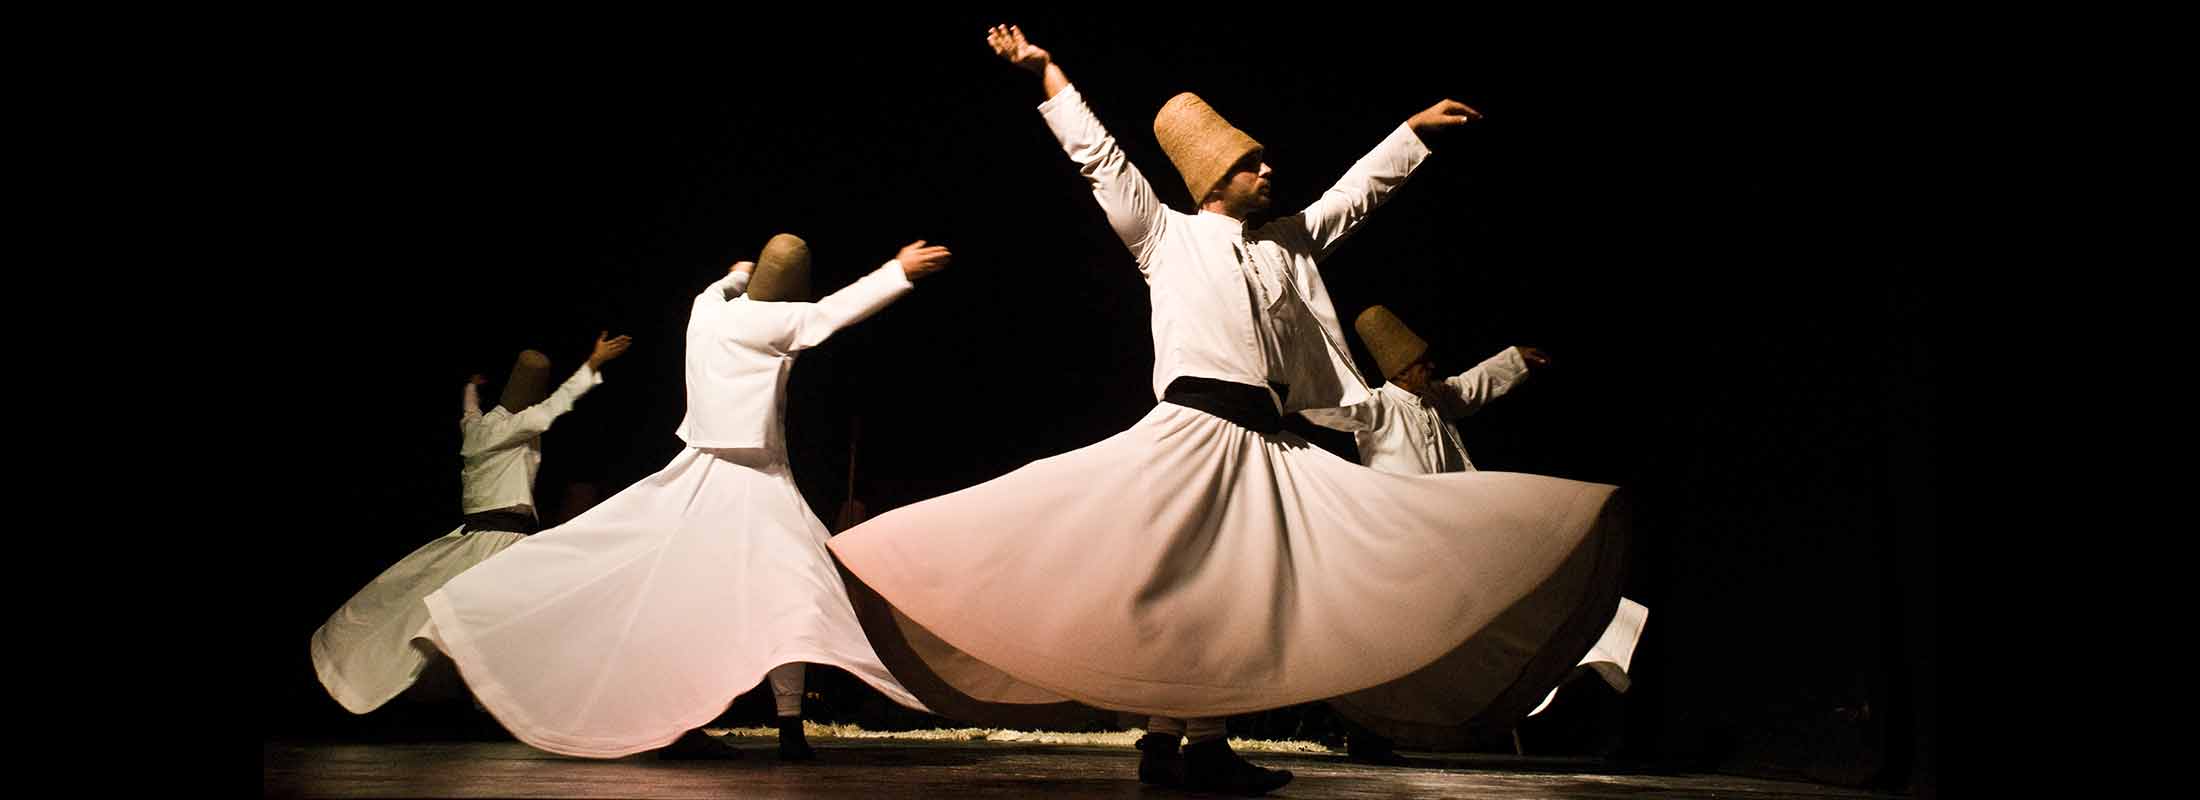 istanbul-hocapasha-whirling-dervishes-show-mystic-music